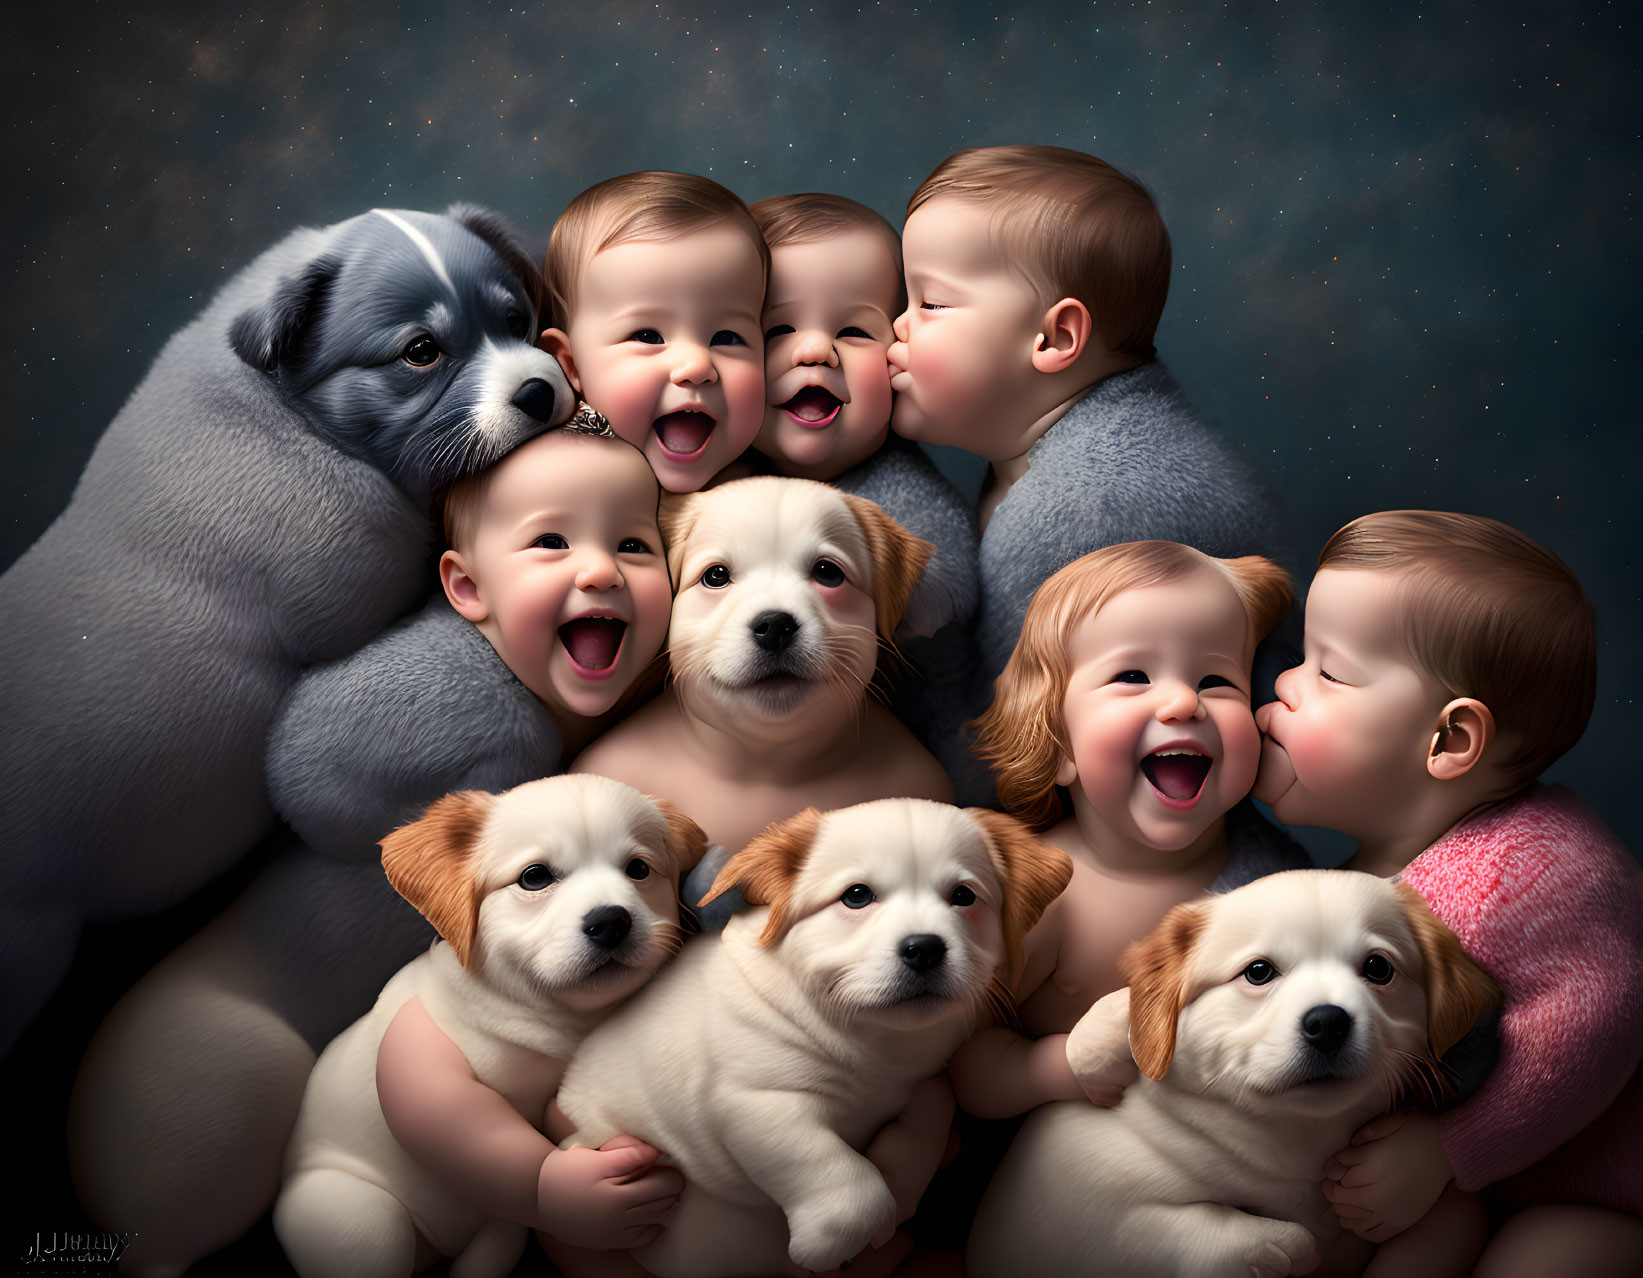 Adorable Babies Snuggling with Puppies Under Starry Sky